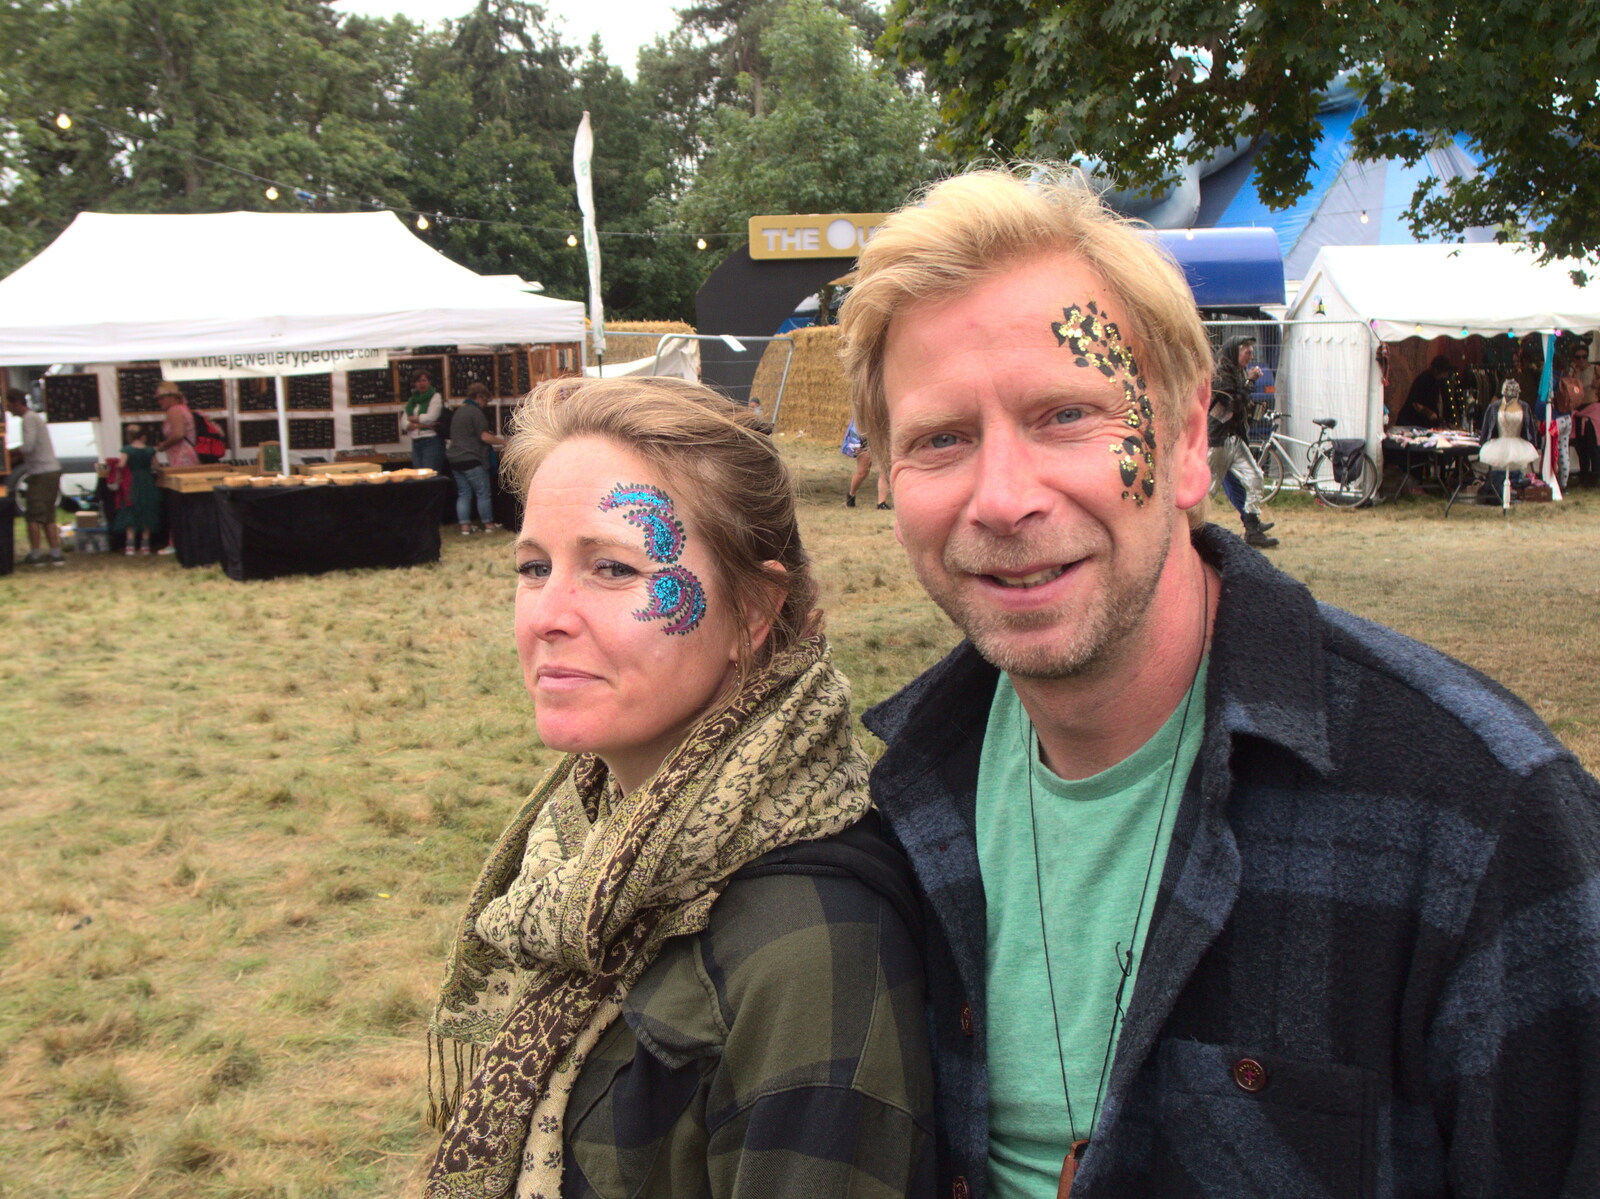 Allyson and Pete have been face-painted from Maui Waui Festival, Hill Farm, Gressenhall, Norfolk - 28th August 2021